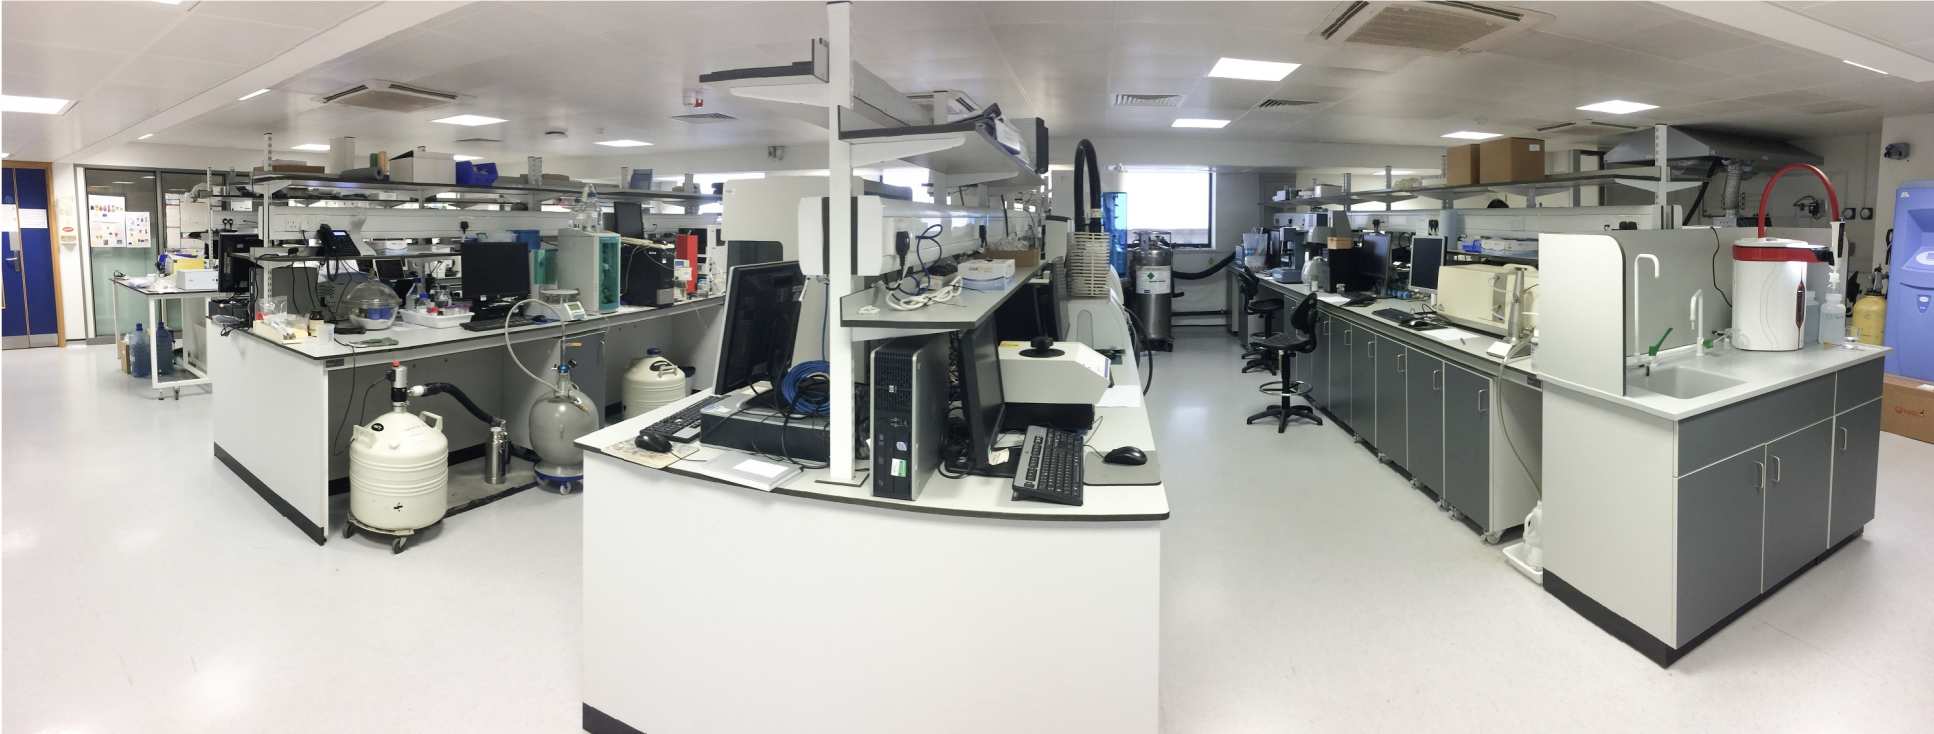 analytical services lab